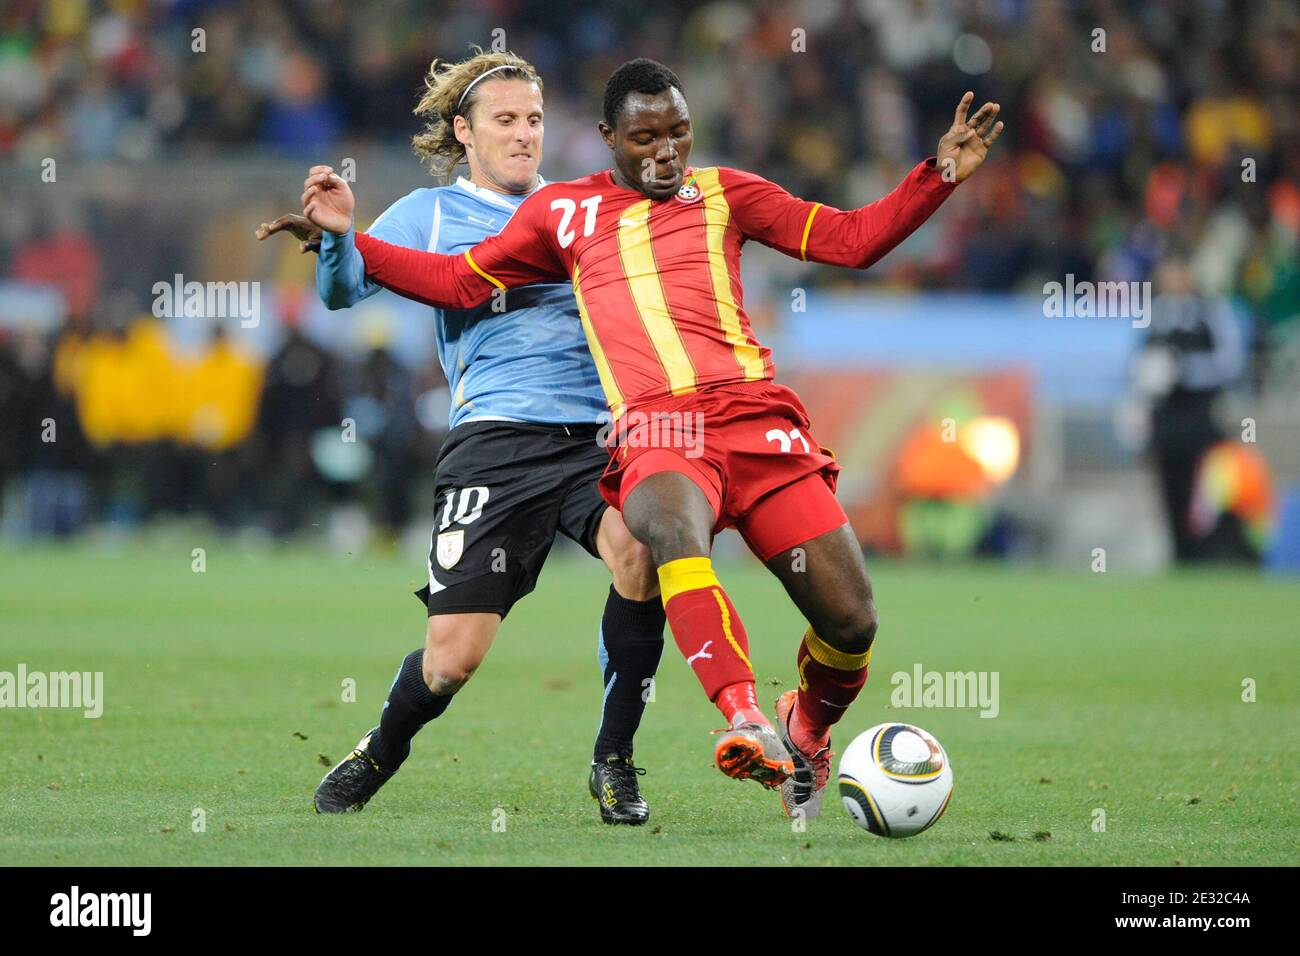 Ghana's Kwadwo Asamoah battles for the ball with Uruguay's Diego Forlan during the 2010 FIFA World Cup South Africa, Quarter Final, Soccer match, Ghana vs Uruguay at Soccer City football stadium in Johannesburg, South Africa on July 2nd, 2010. Uruguay won 1-1 (4p to 2). Photo by Henri Szwarc/ABACAPRESS.COM Stock Photo